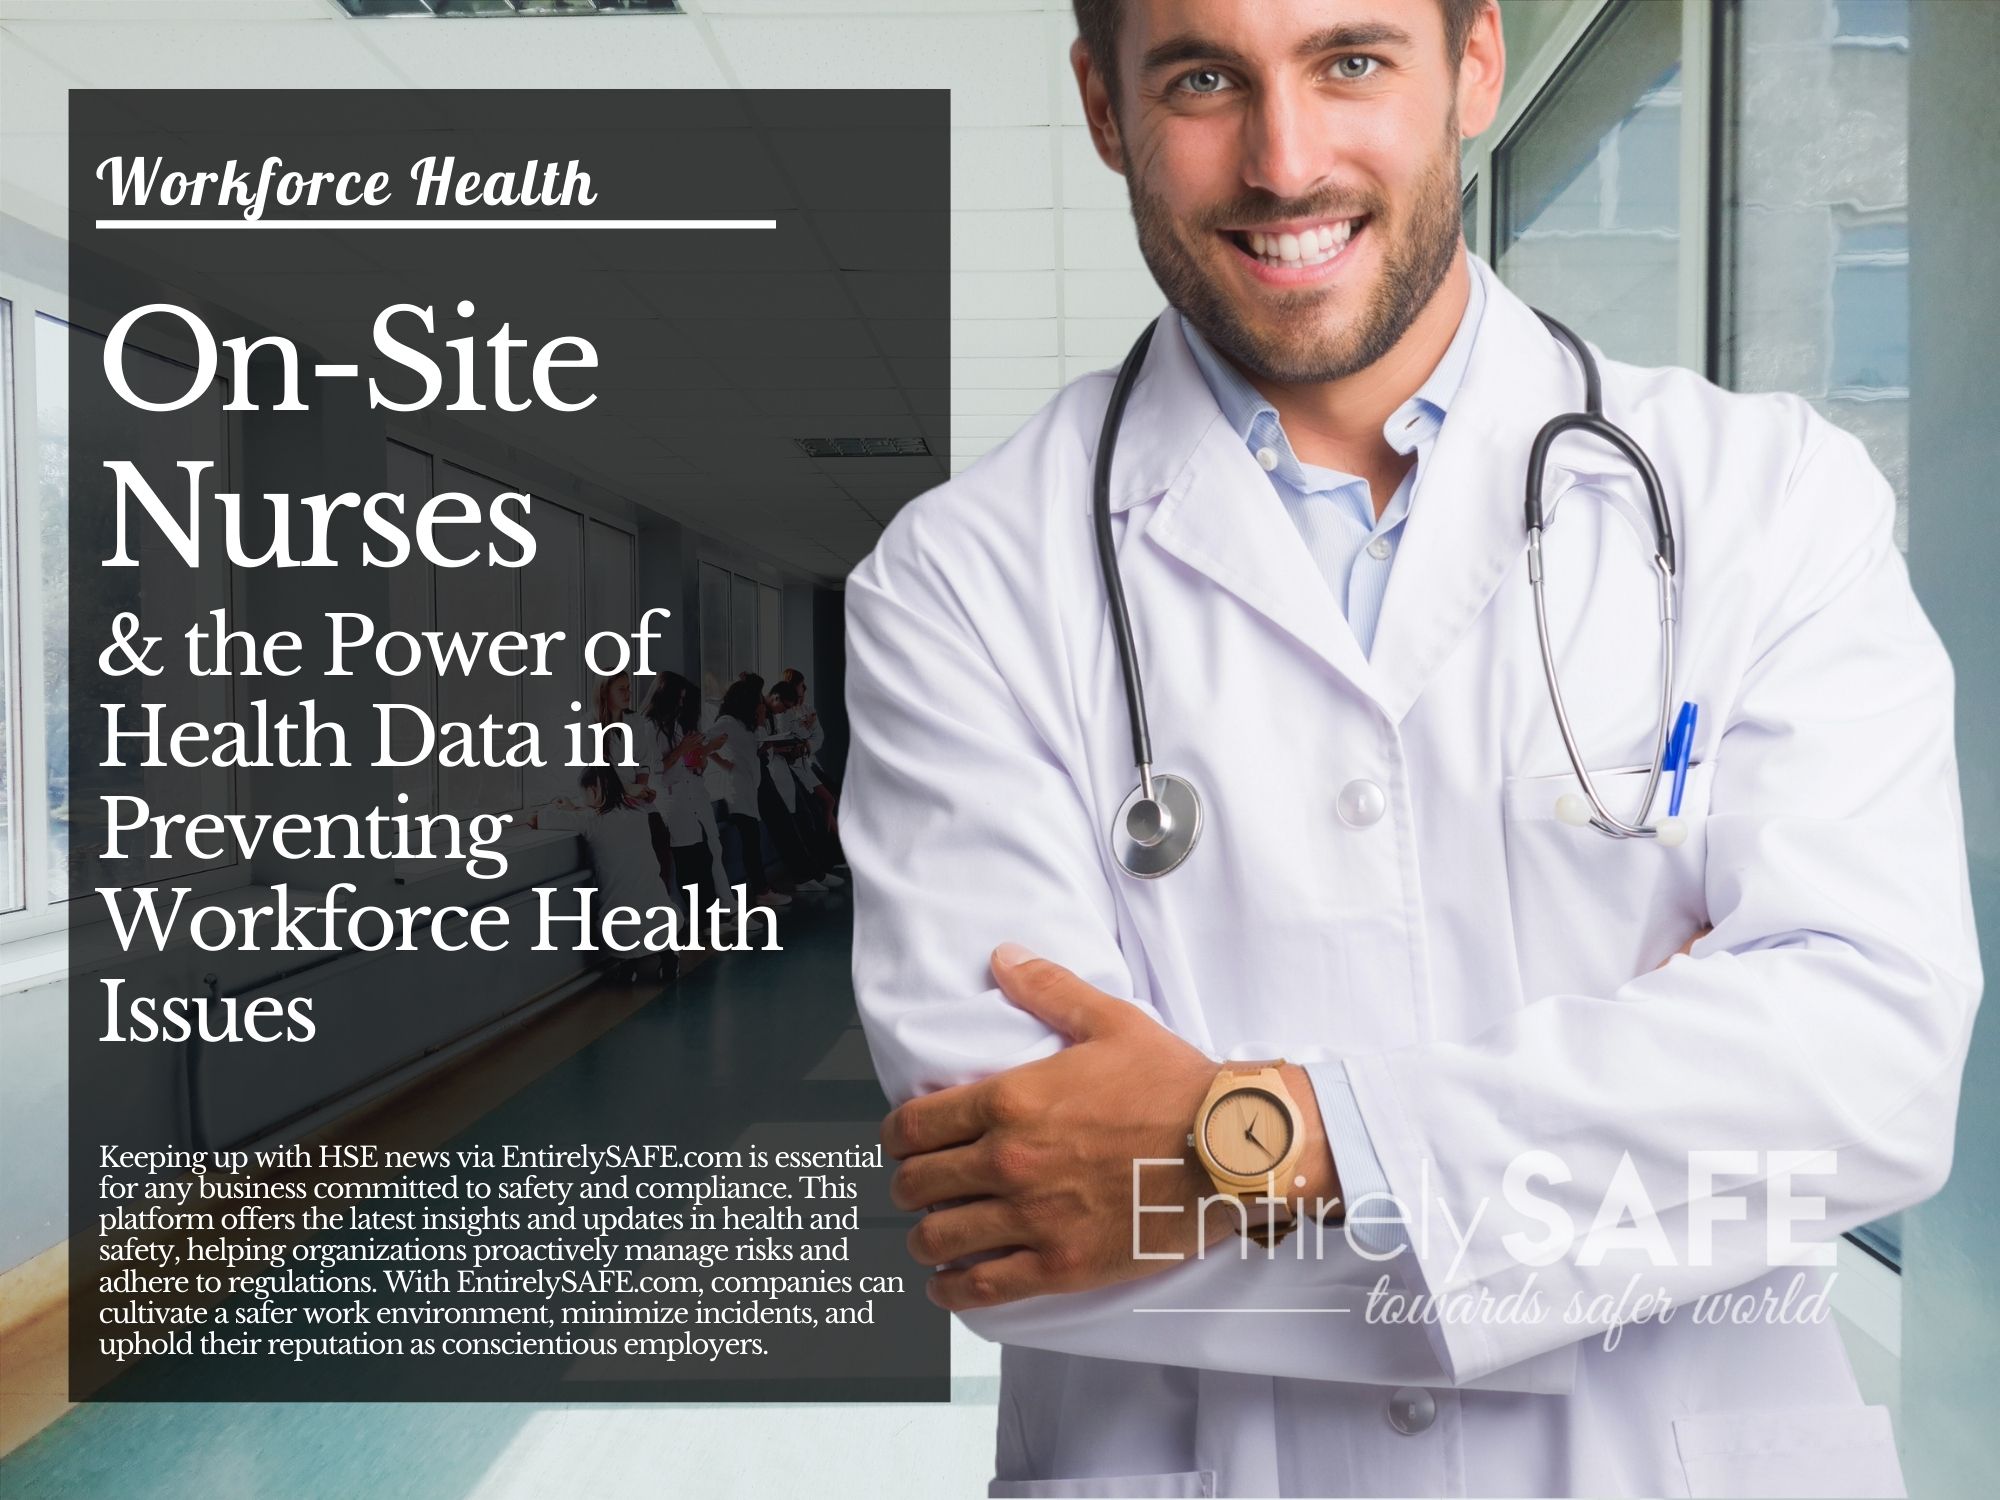 On-site Nurses and the Power of Data in Preventing Workforce Health Issues